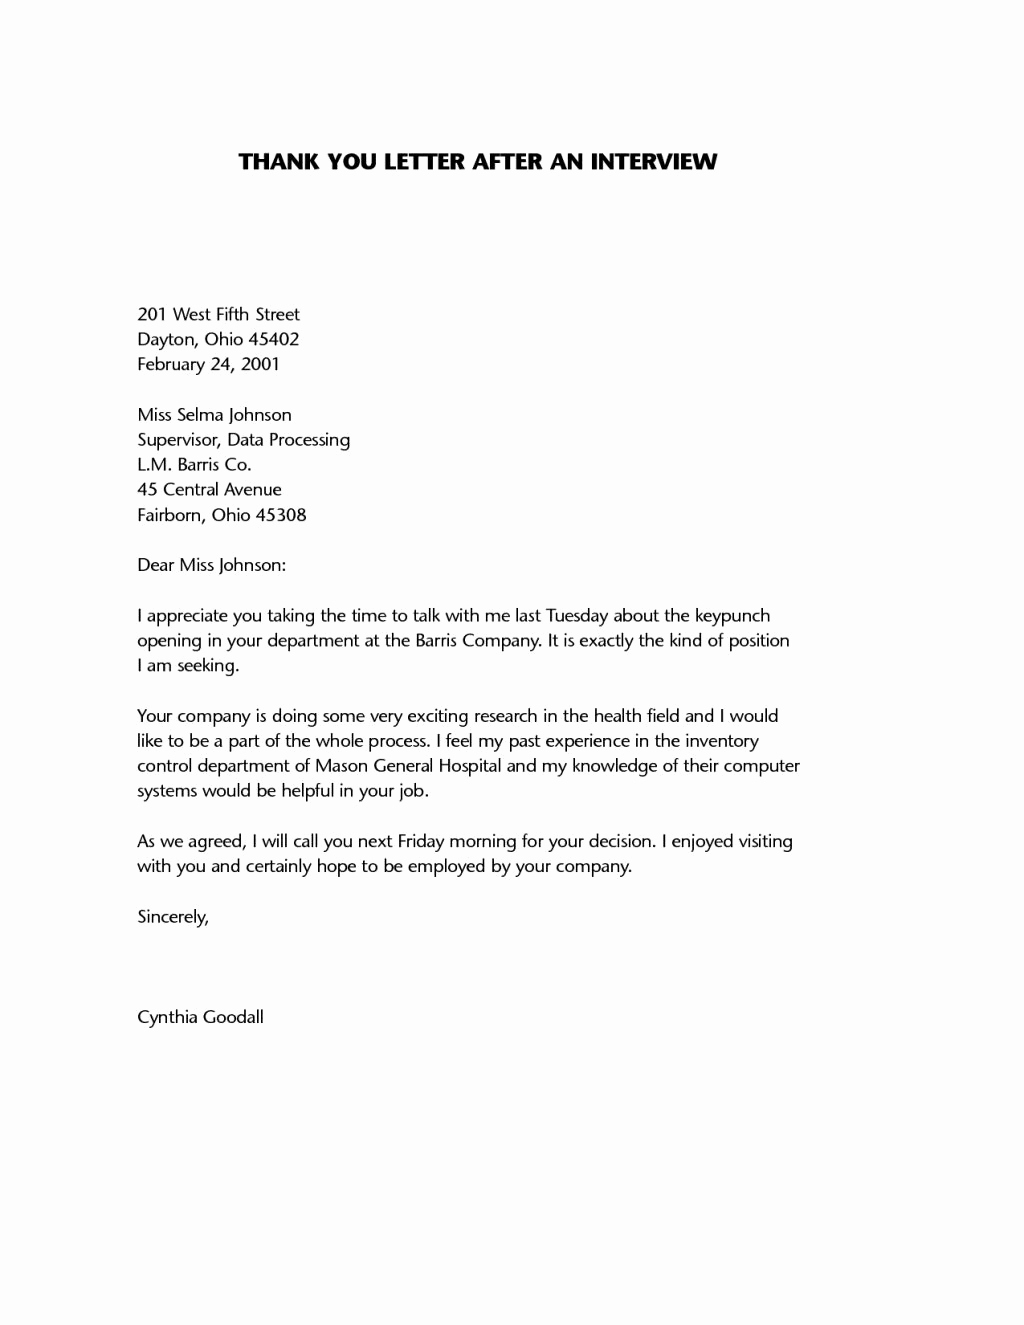 Thank You Note Sample New Sample Thank You Letter after Interview